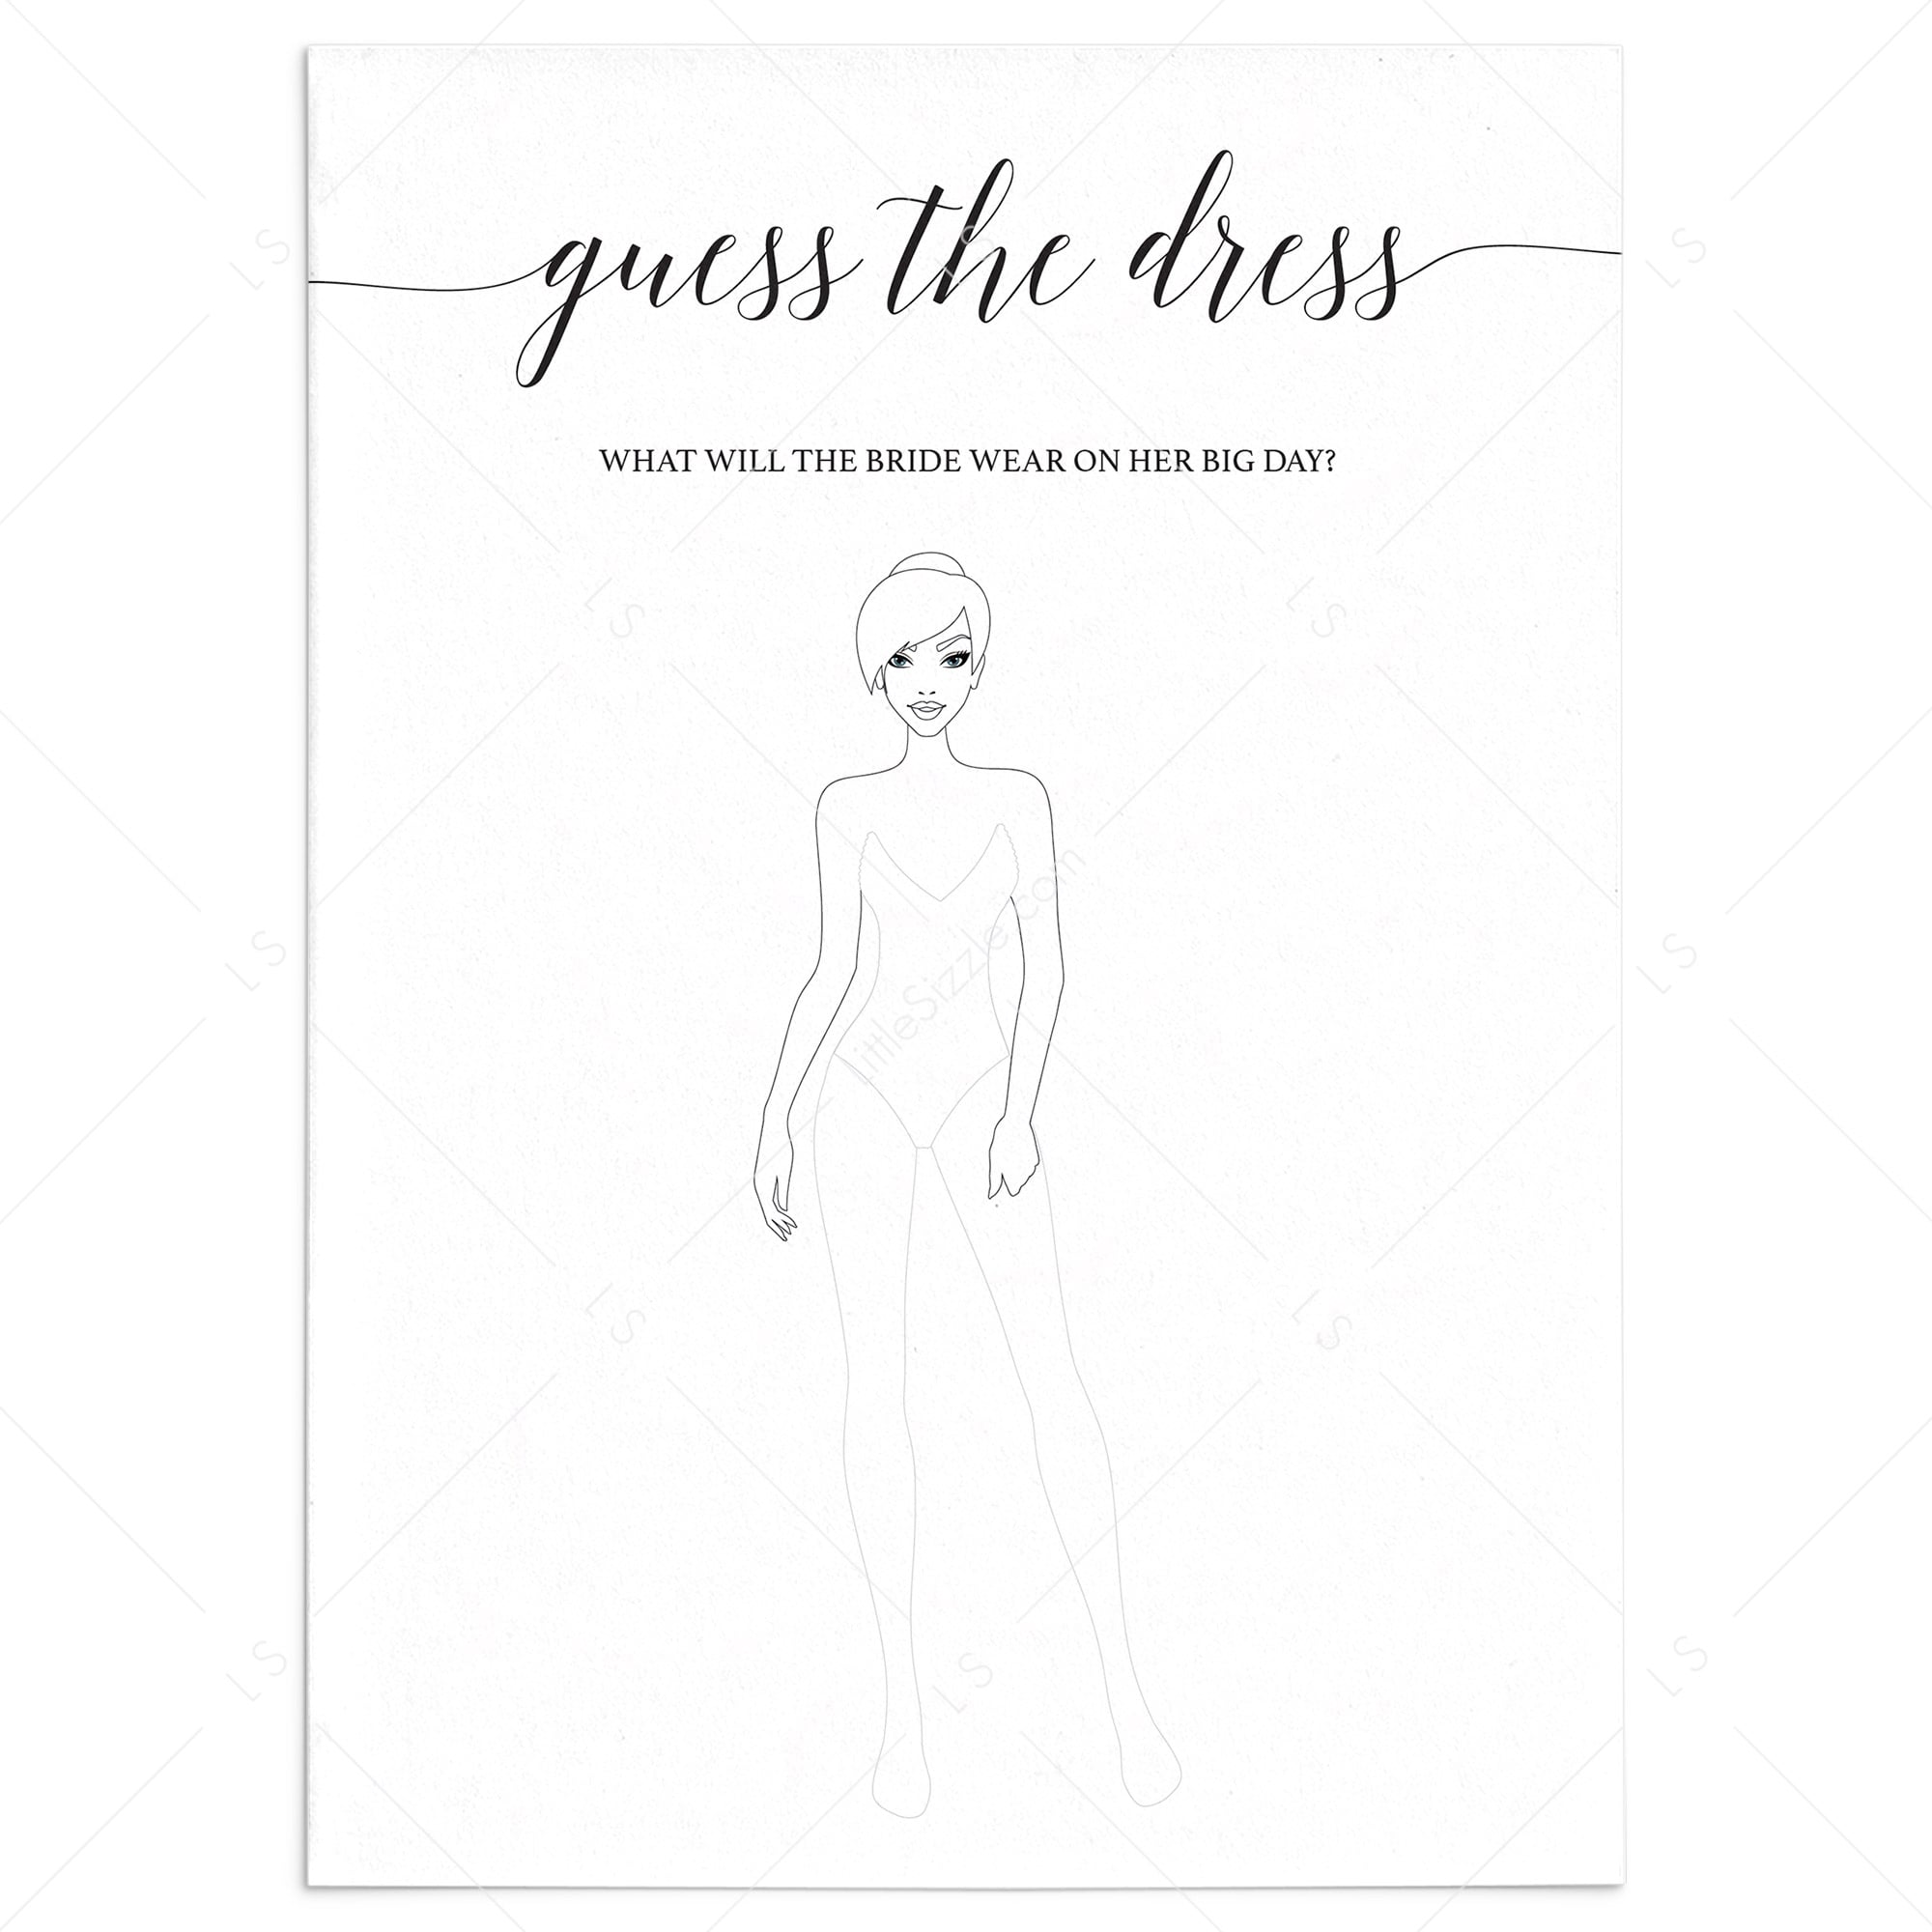 Guess the wedding dress bridal shower game by LittleSizzle